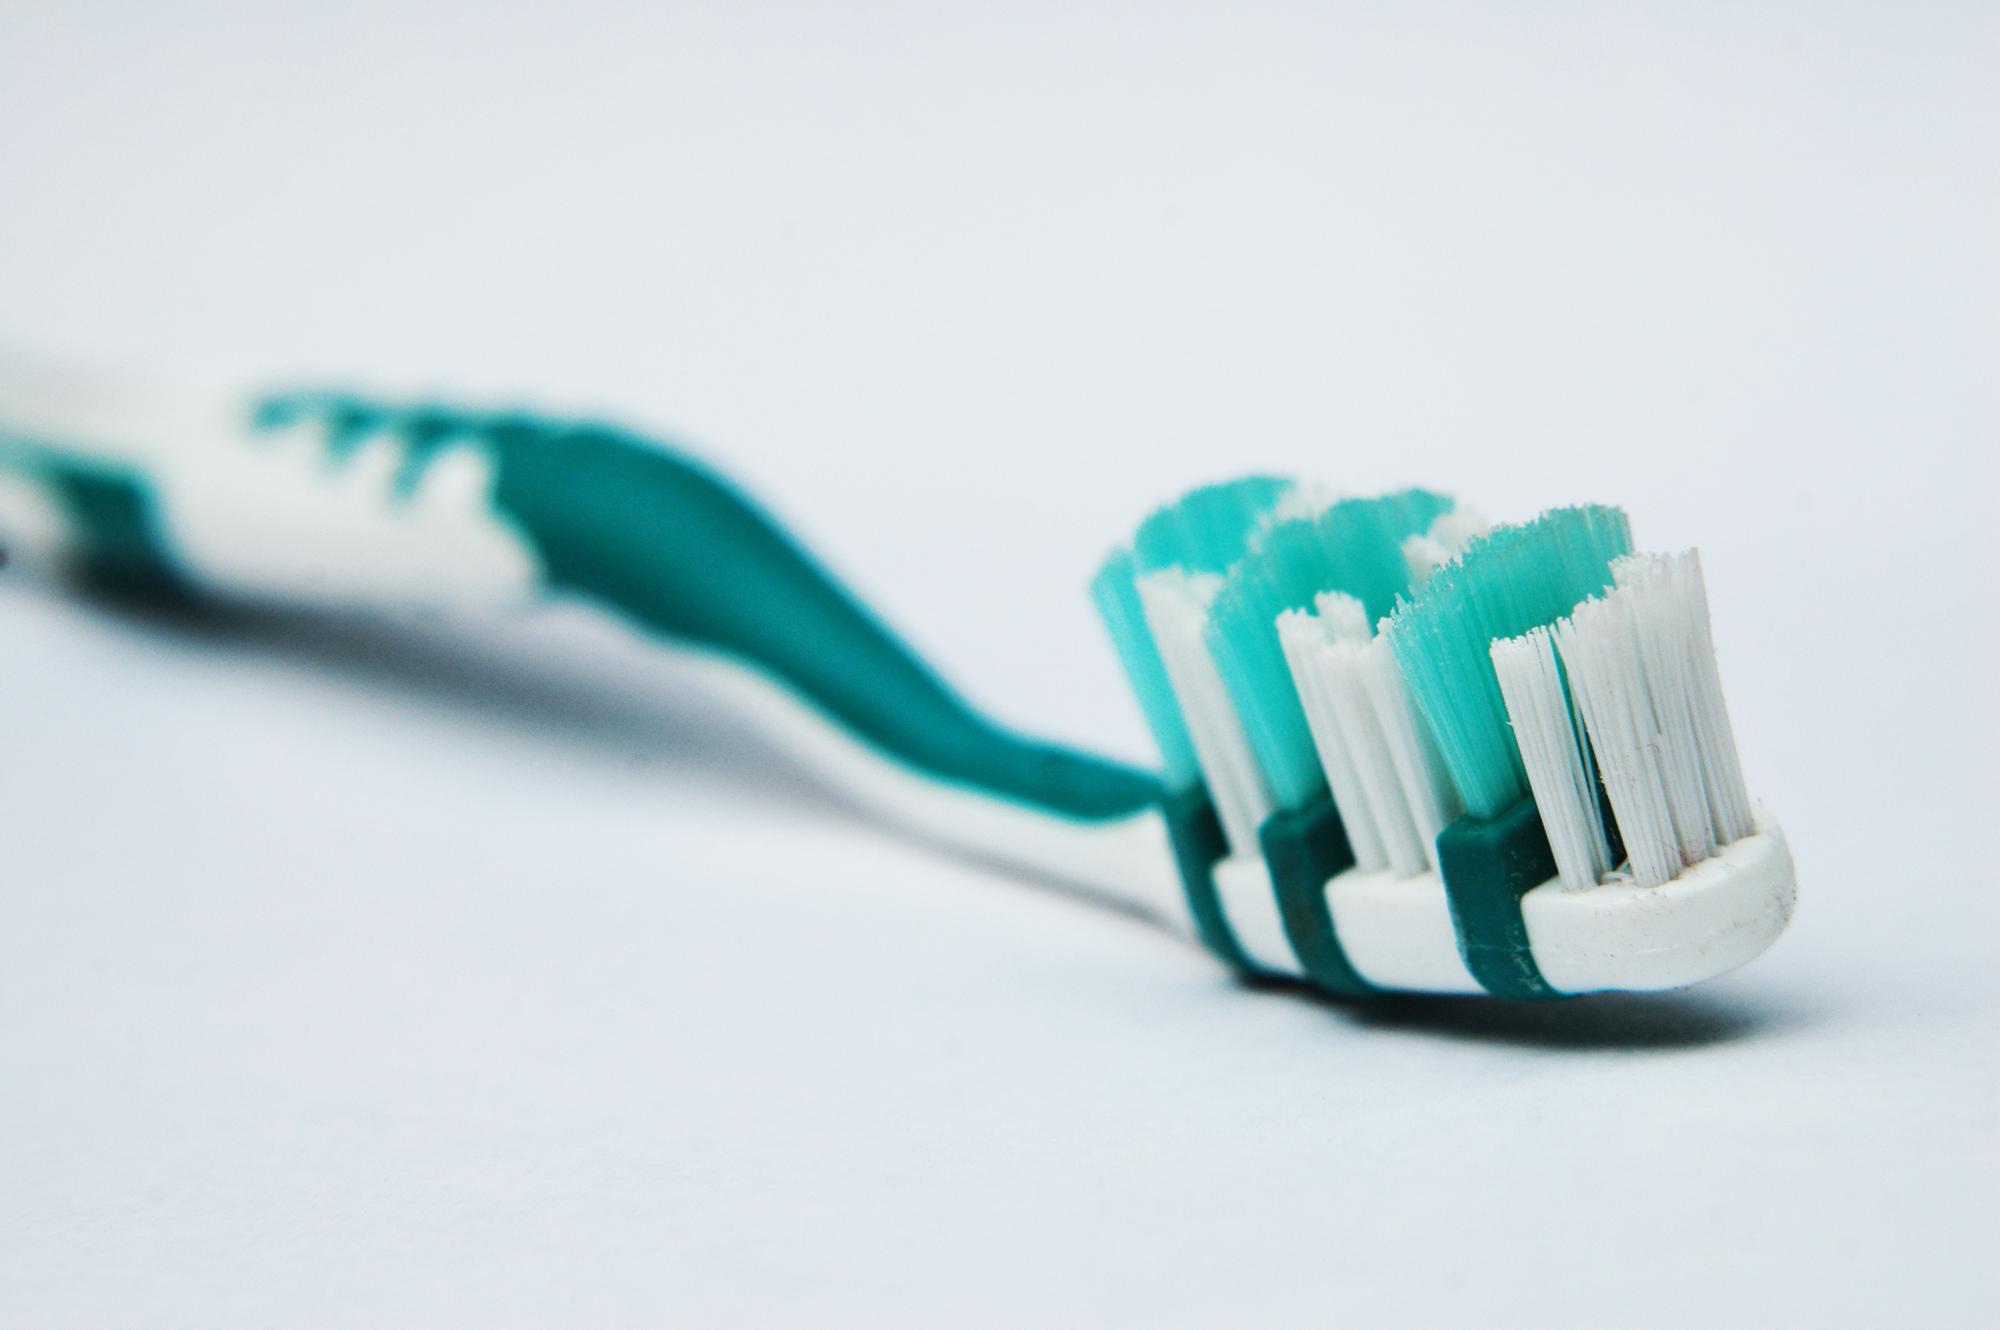 What Is The Meaning Of Toothbrush